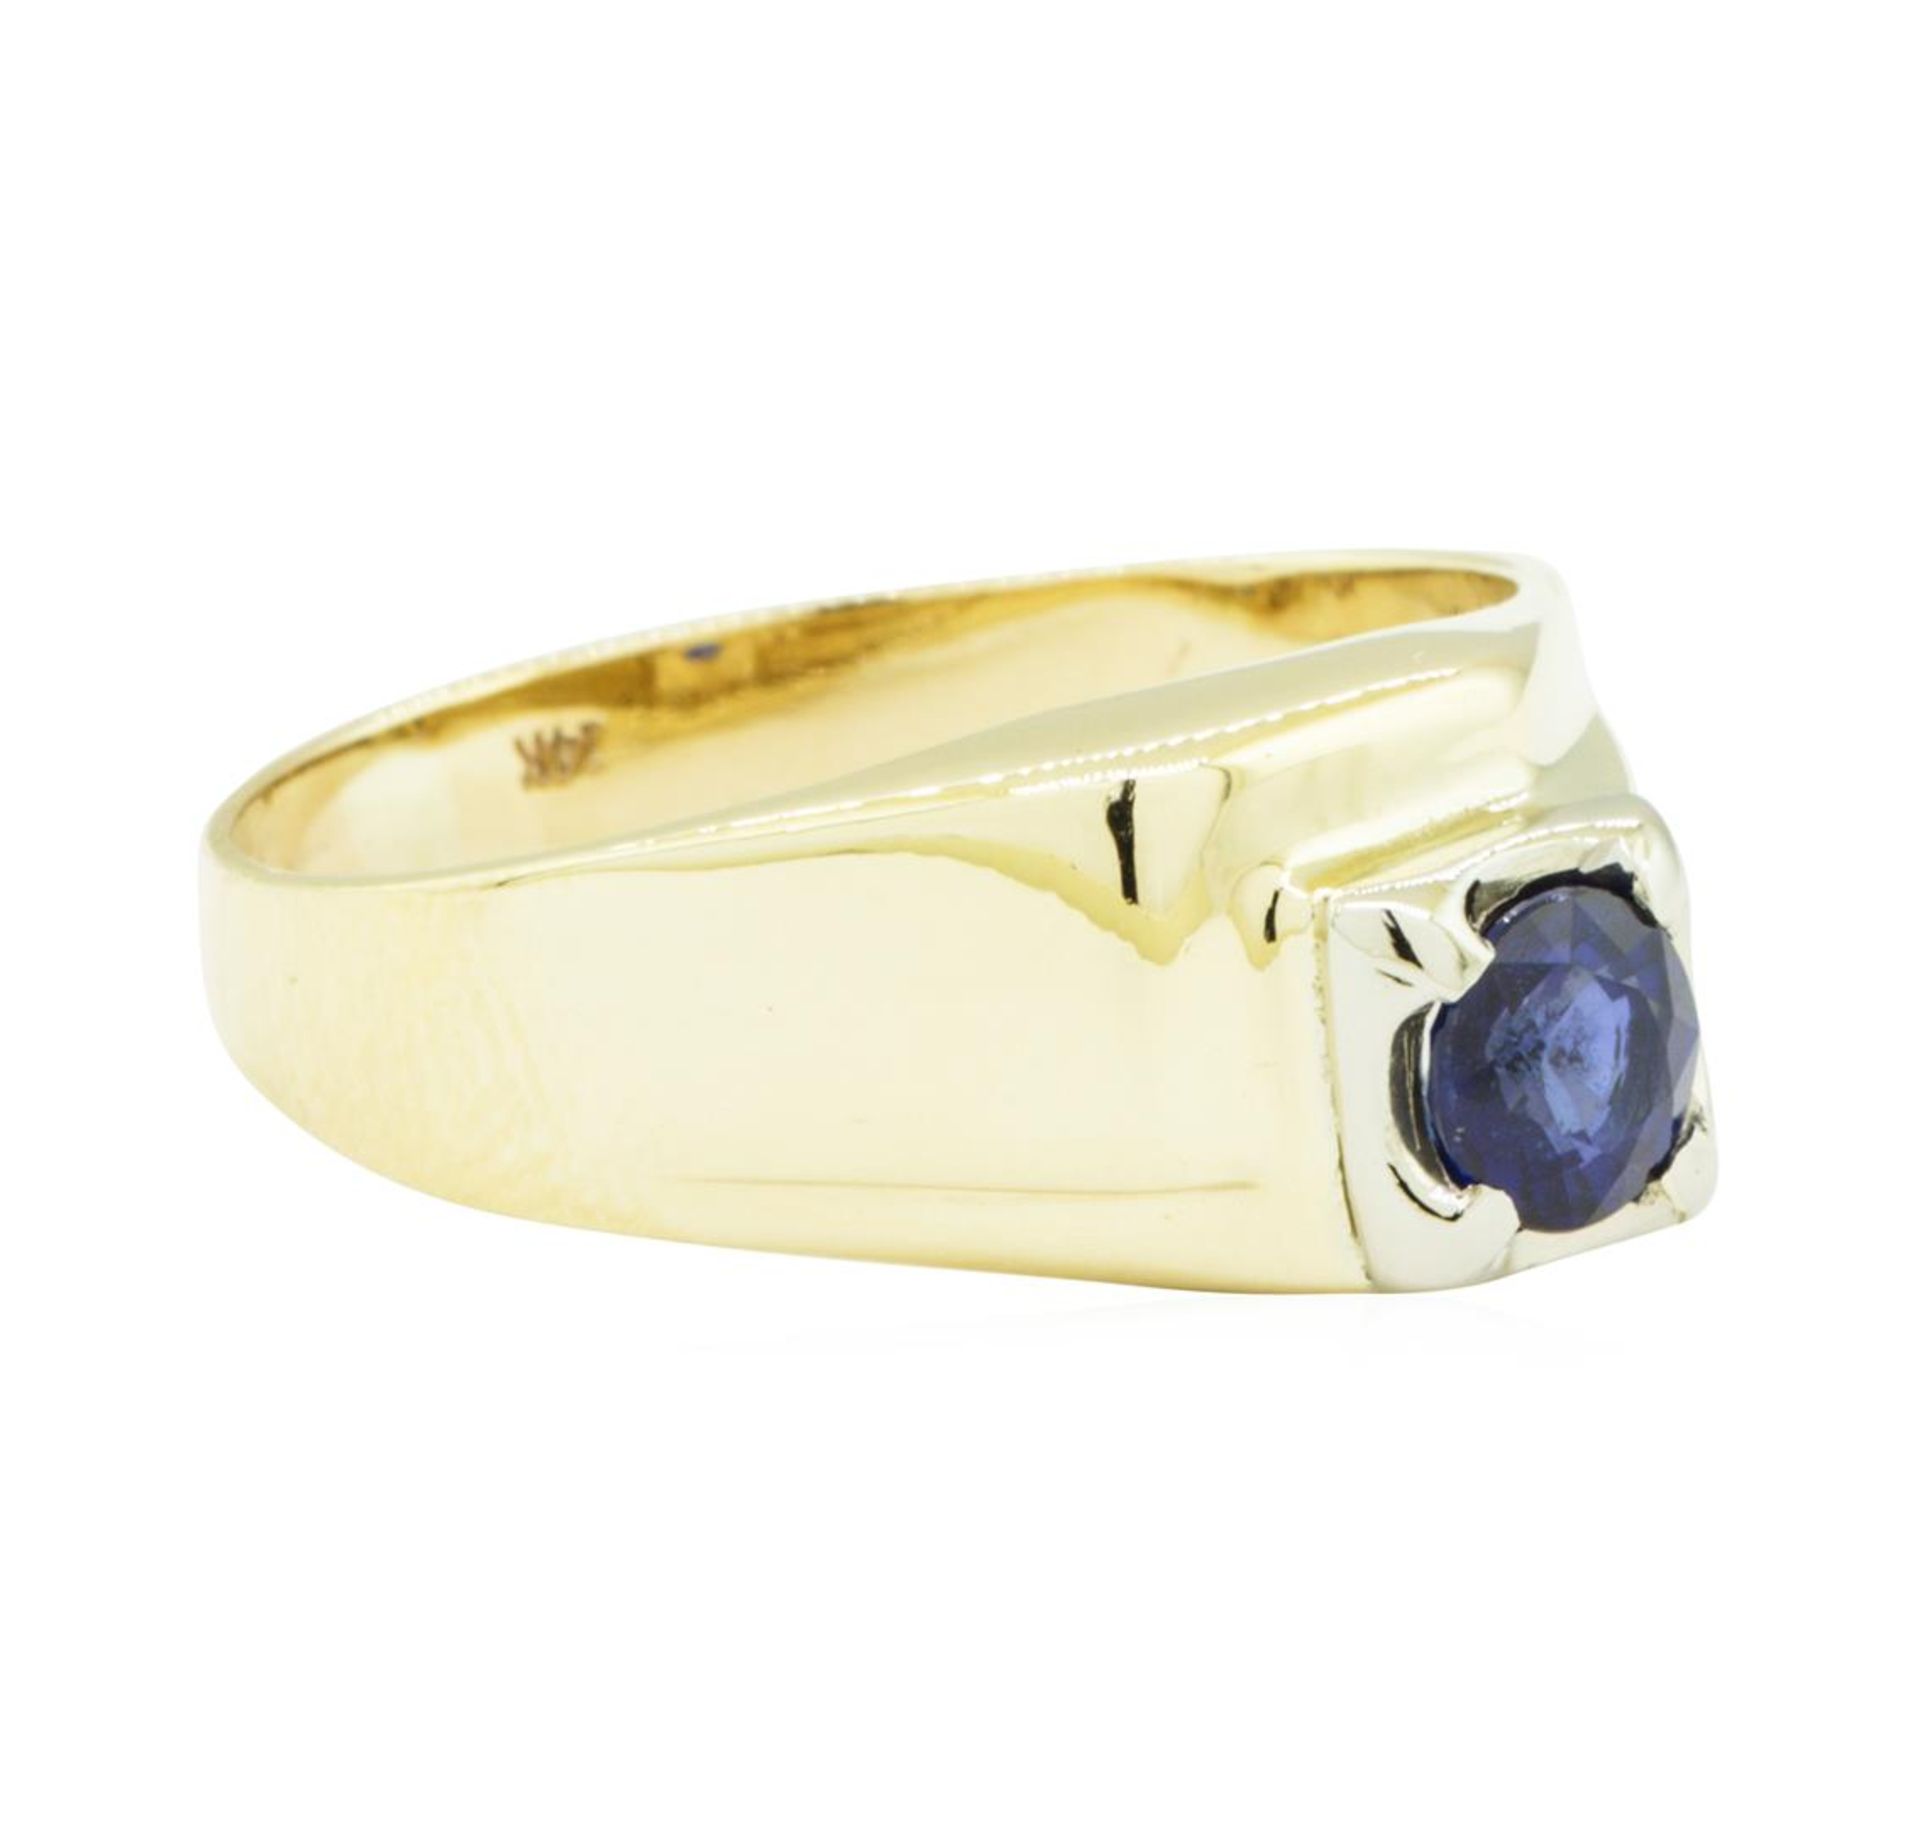 0.99 ctw Blue Sapphire Ring - 14KT Yellow Gold